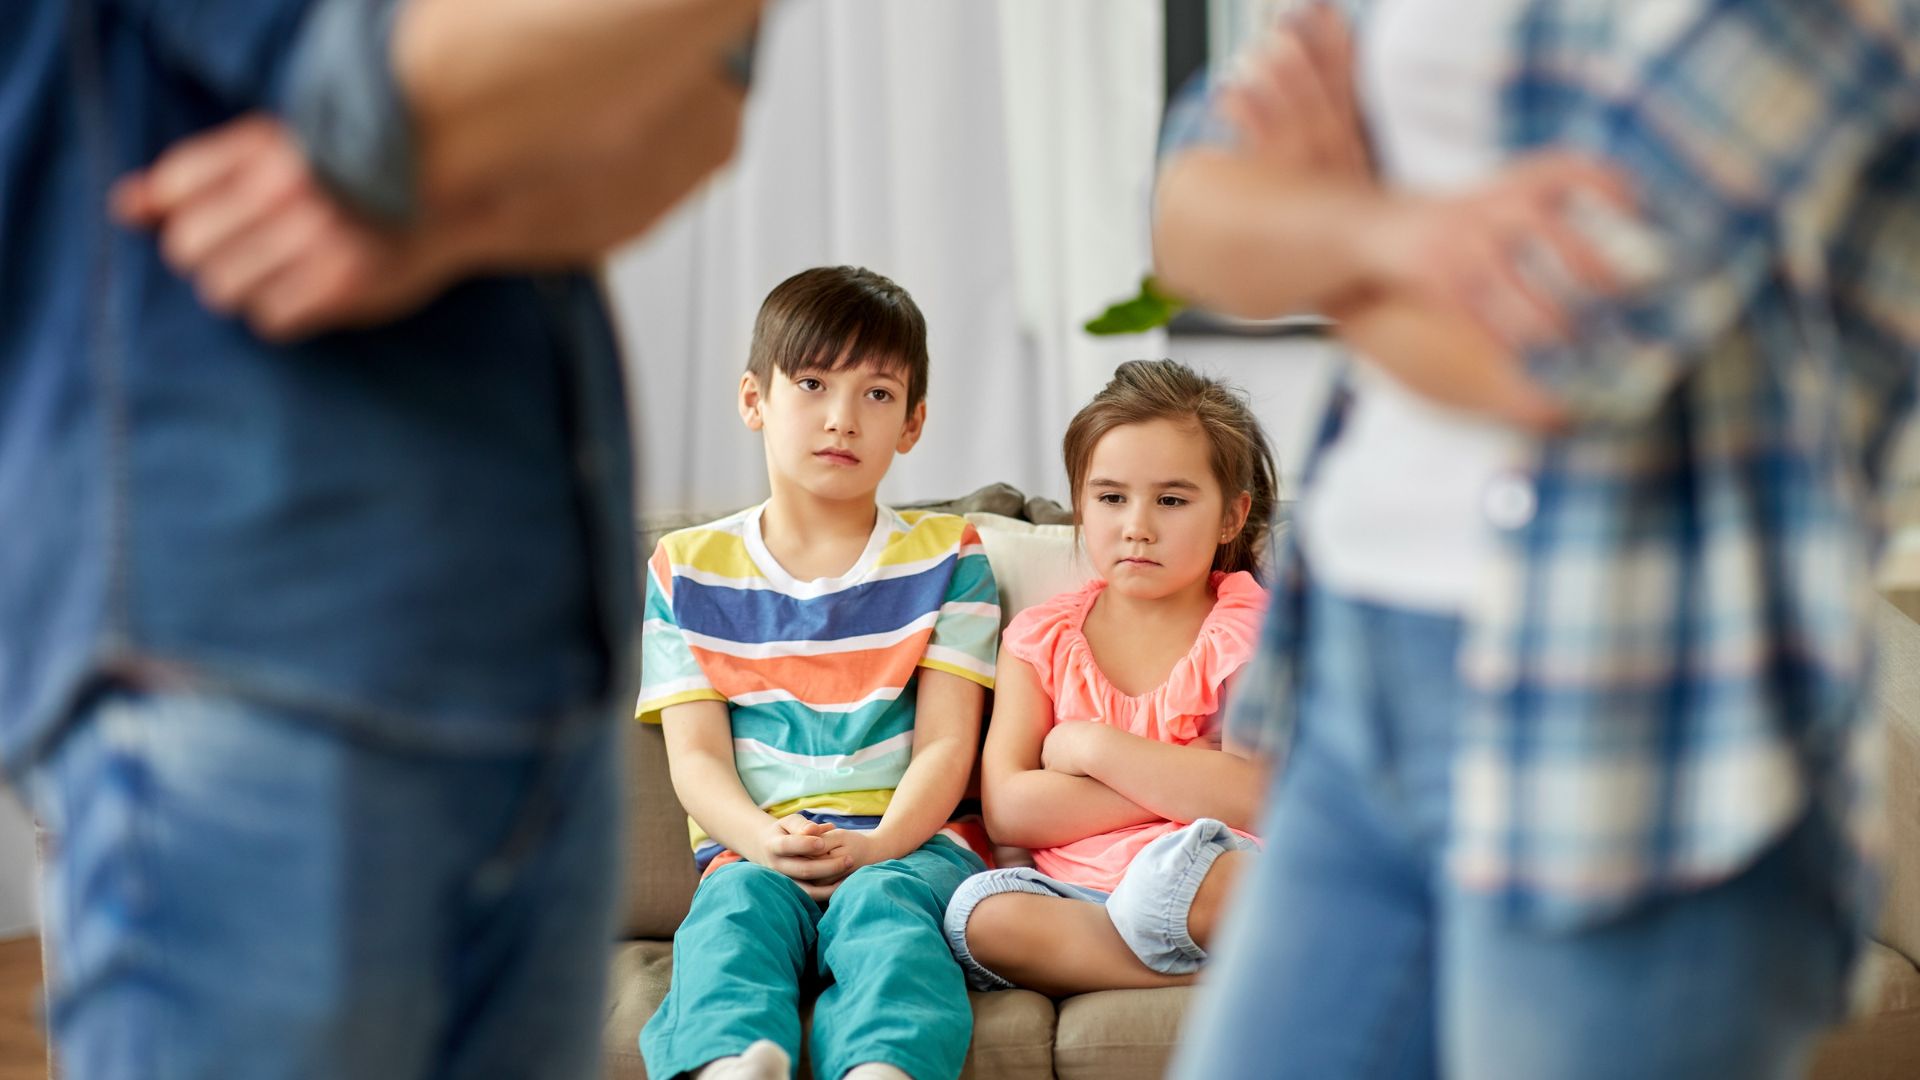 Beyond the Split: Understanding the Emotional Consequences of Divorce on Children